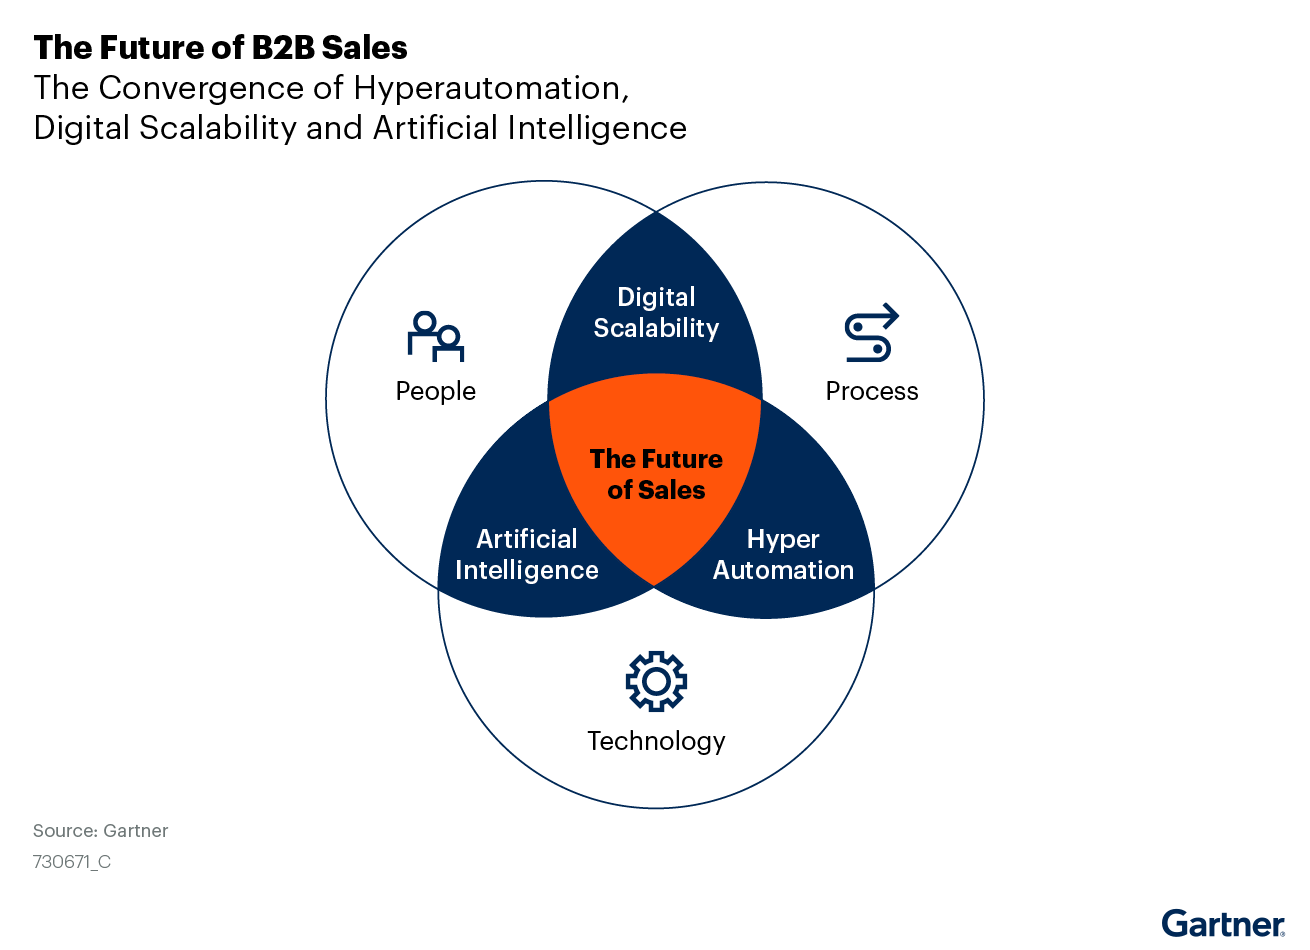 The_Future_of_B2B_Sales__The_Convergence_of_Hyperautomation_Digital_Scalability_and_Artificial_Intelligence